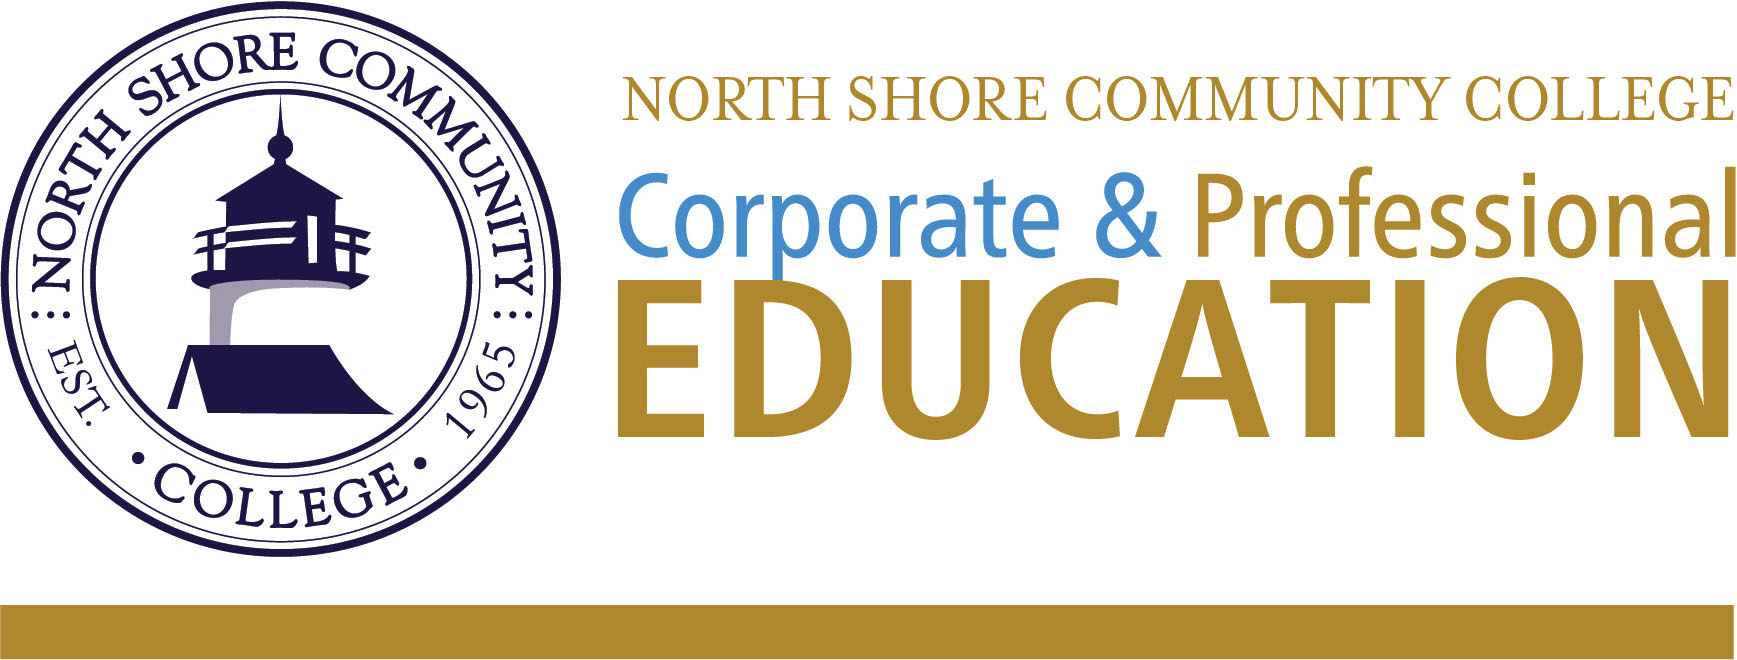 Corporate and Professional Education logo